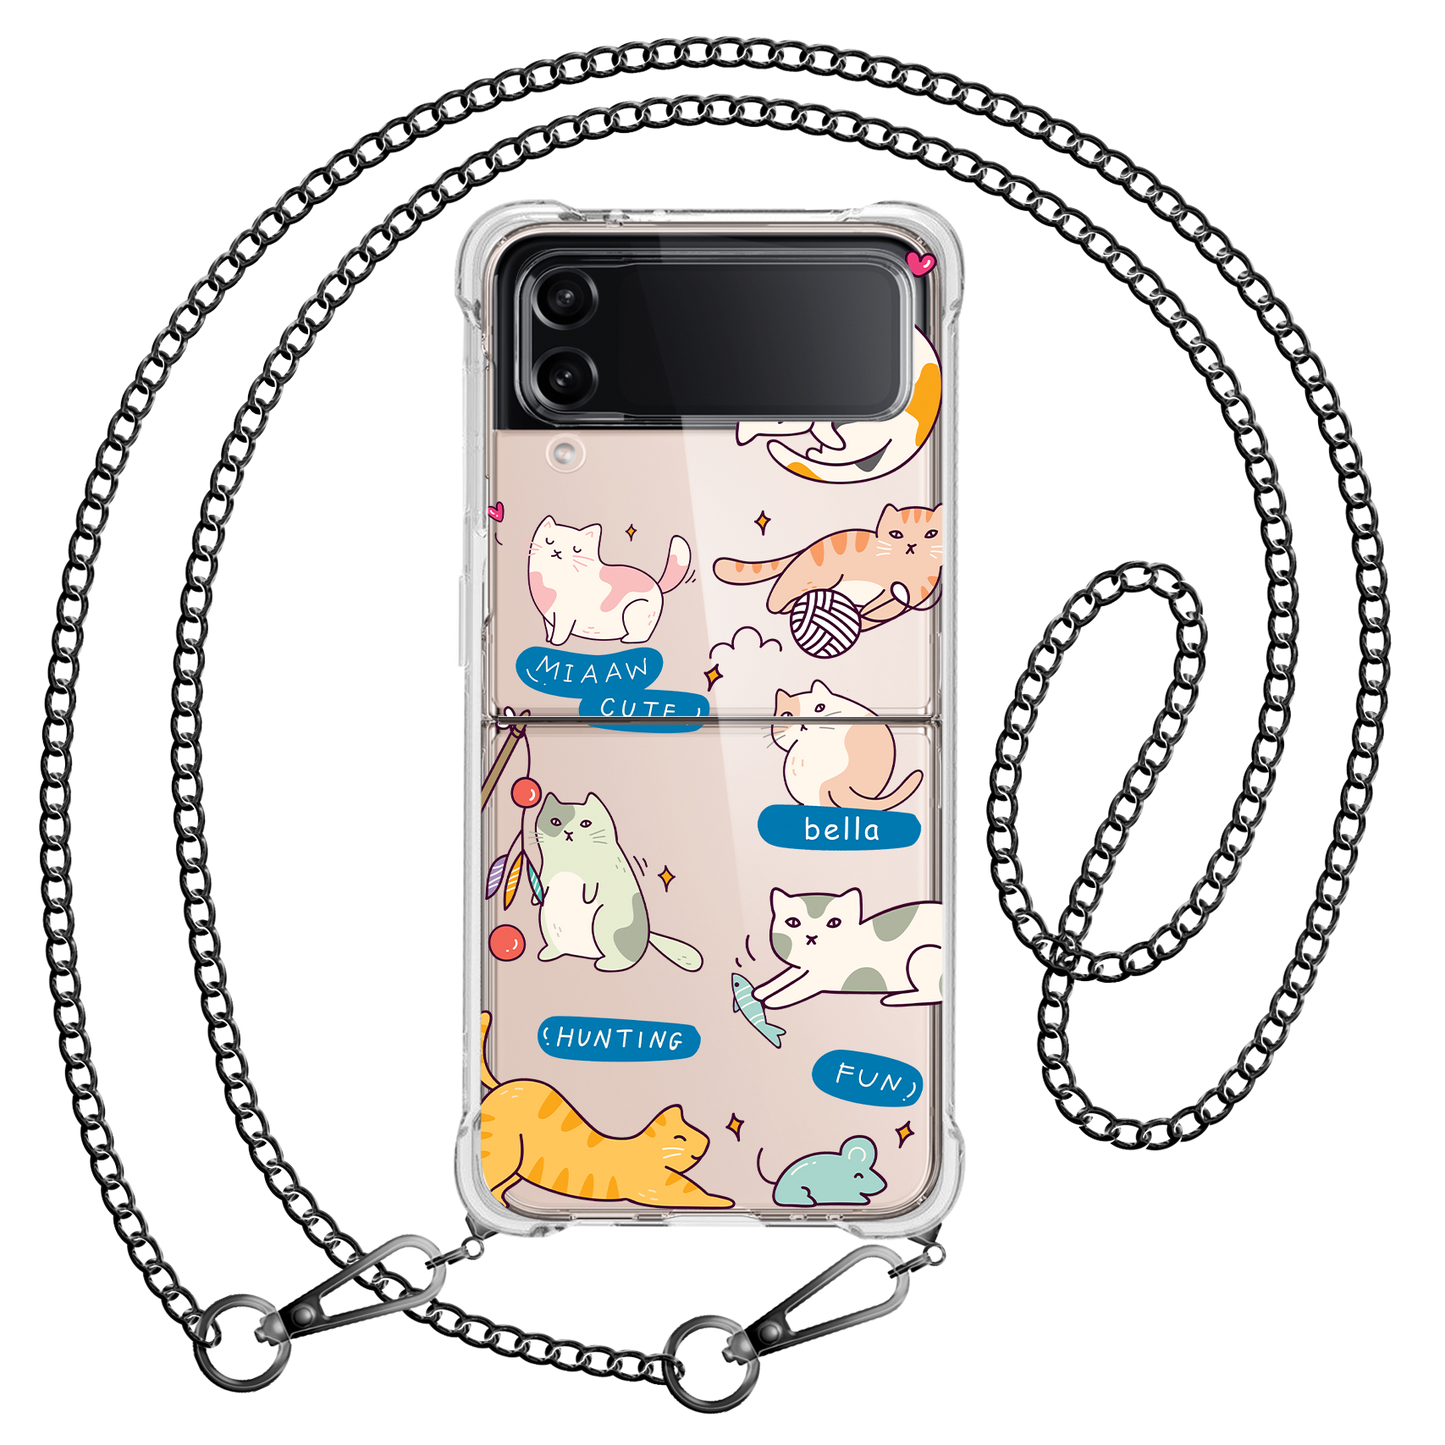 Android Flip / Fold Case - Playful Cat 2.0